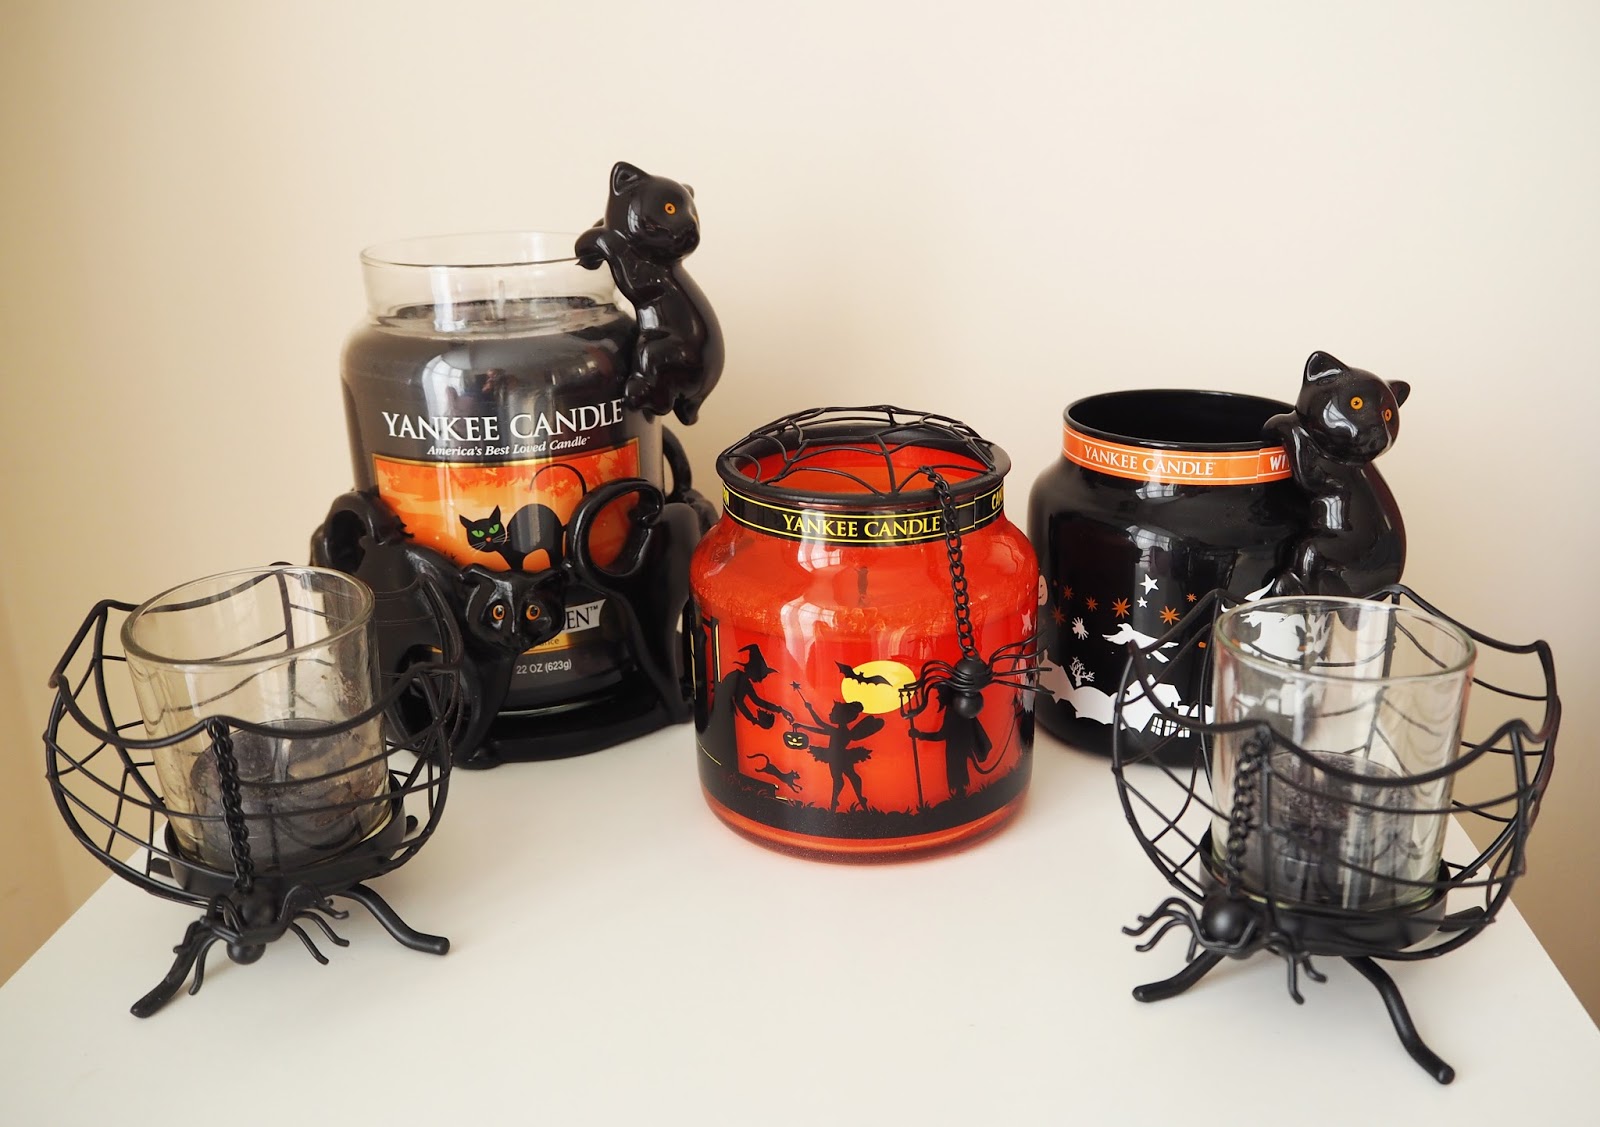 Yankee Candle Halloween Candle Collection | Katie Kirk Loves